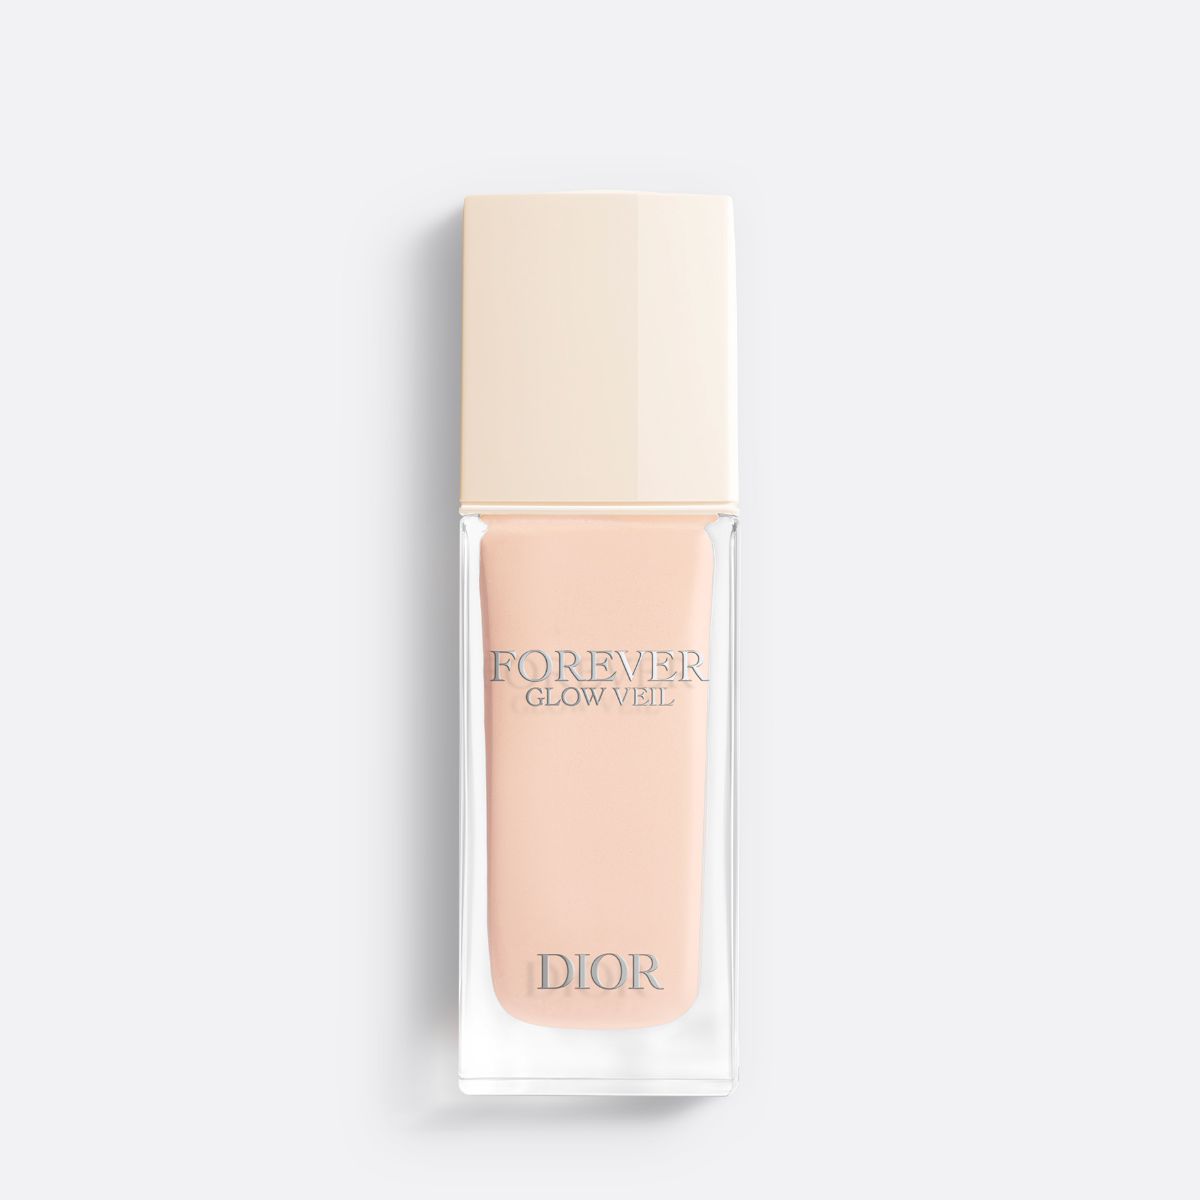 DIOR FOREVER GLOW VEIL ~ Radiance Primer - 24h Hydration - Concentrated in Floral Skincare and Hyaluronic Acid